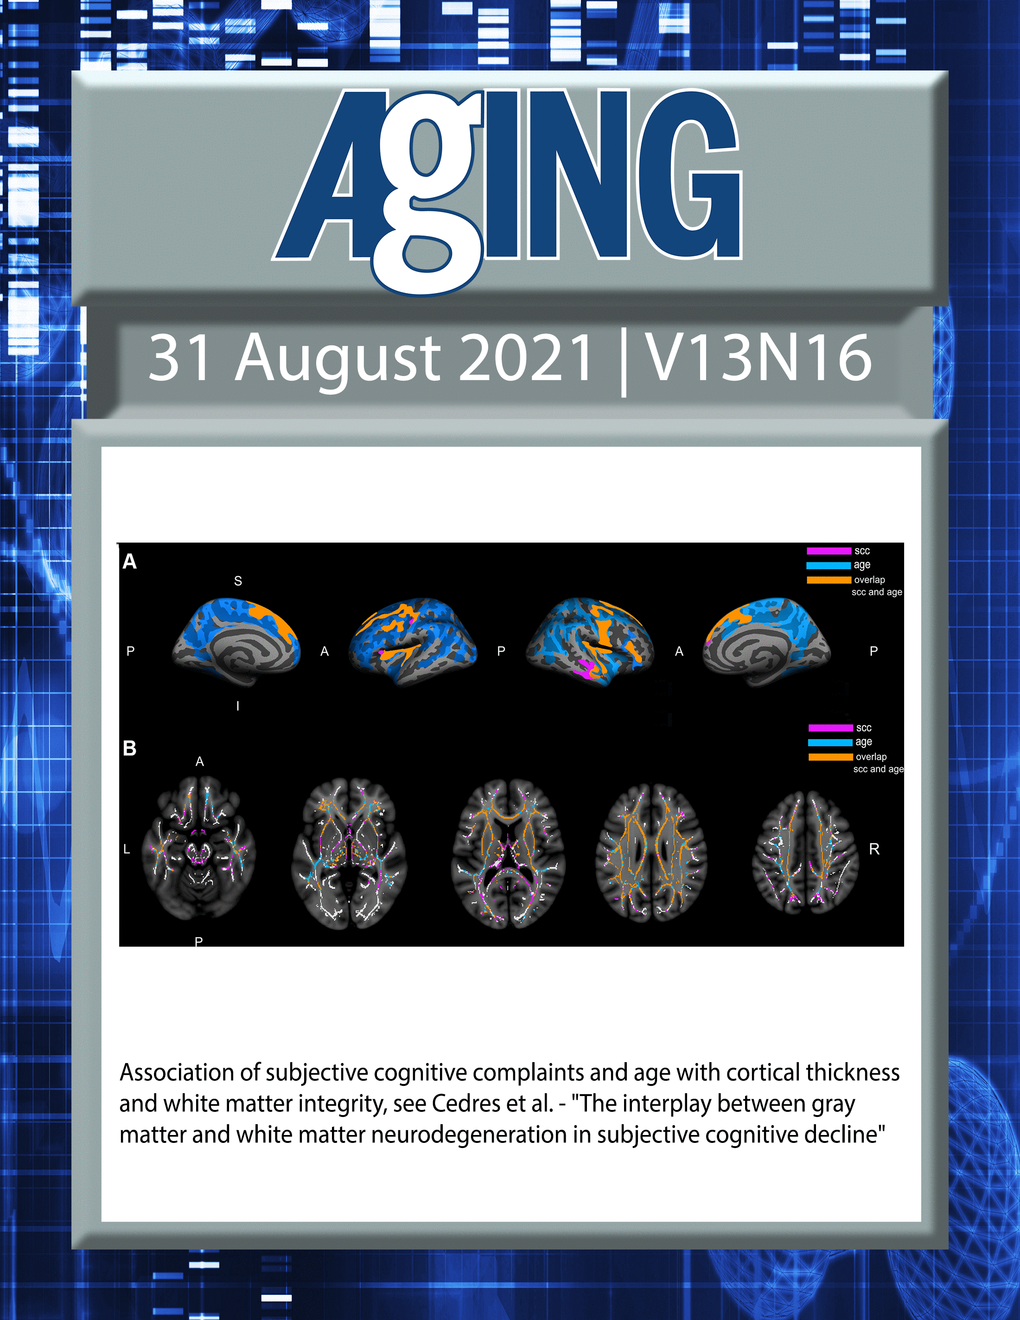 The cover features Figure 1 " Association of subjective cognitive complaints and age with cortical thickness and white matter integrity“ from Cedres et al.